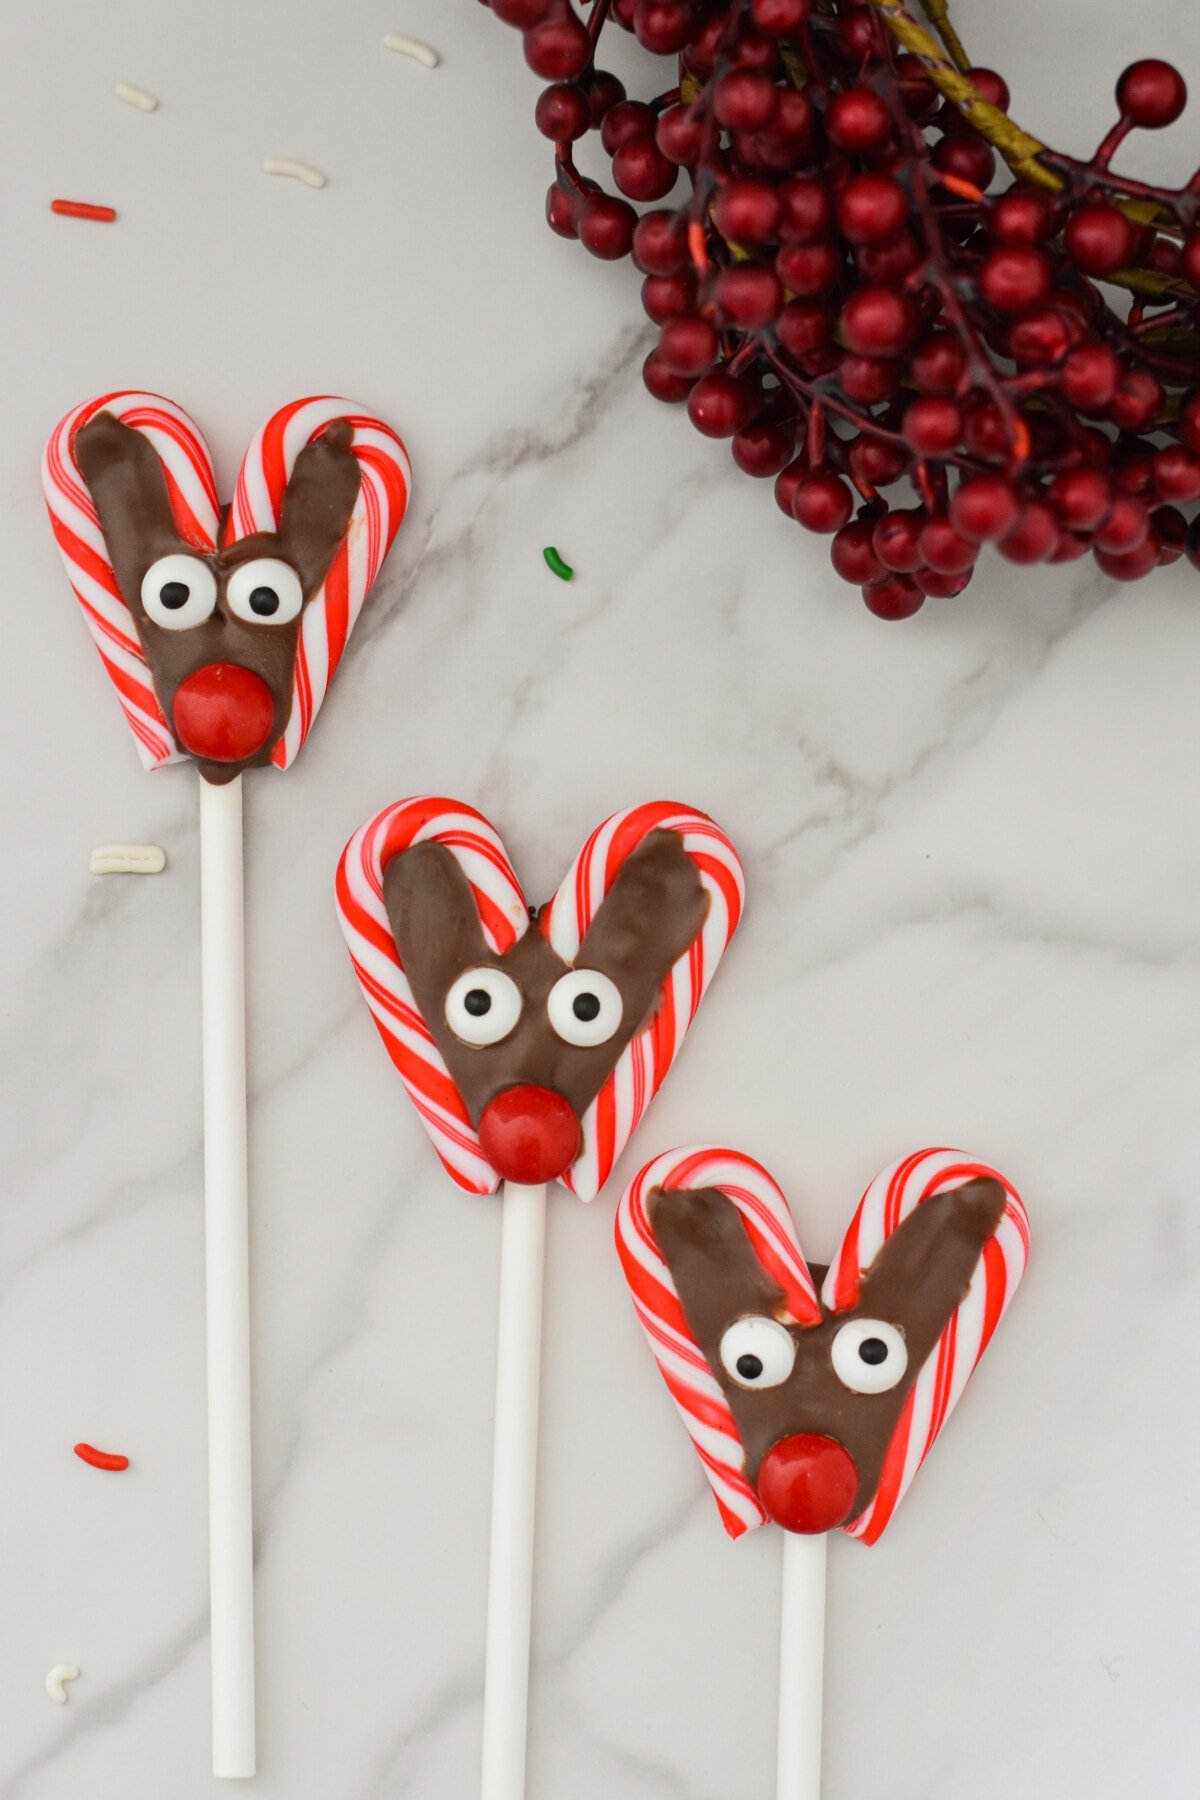 Candy Cane Reindeer with a white background